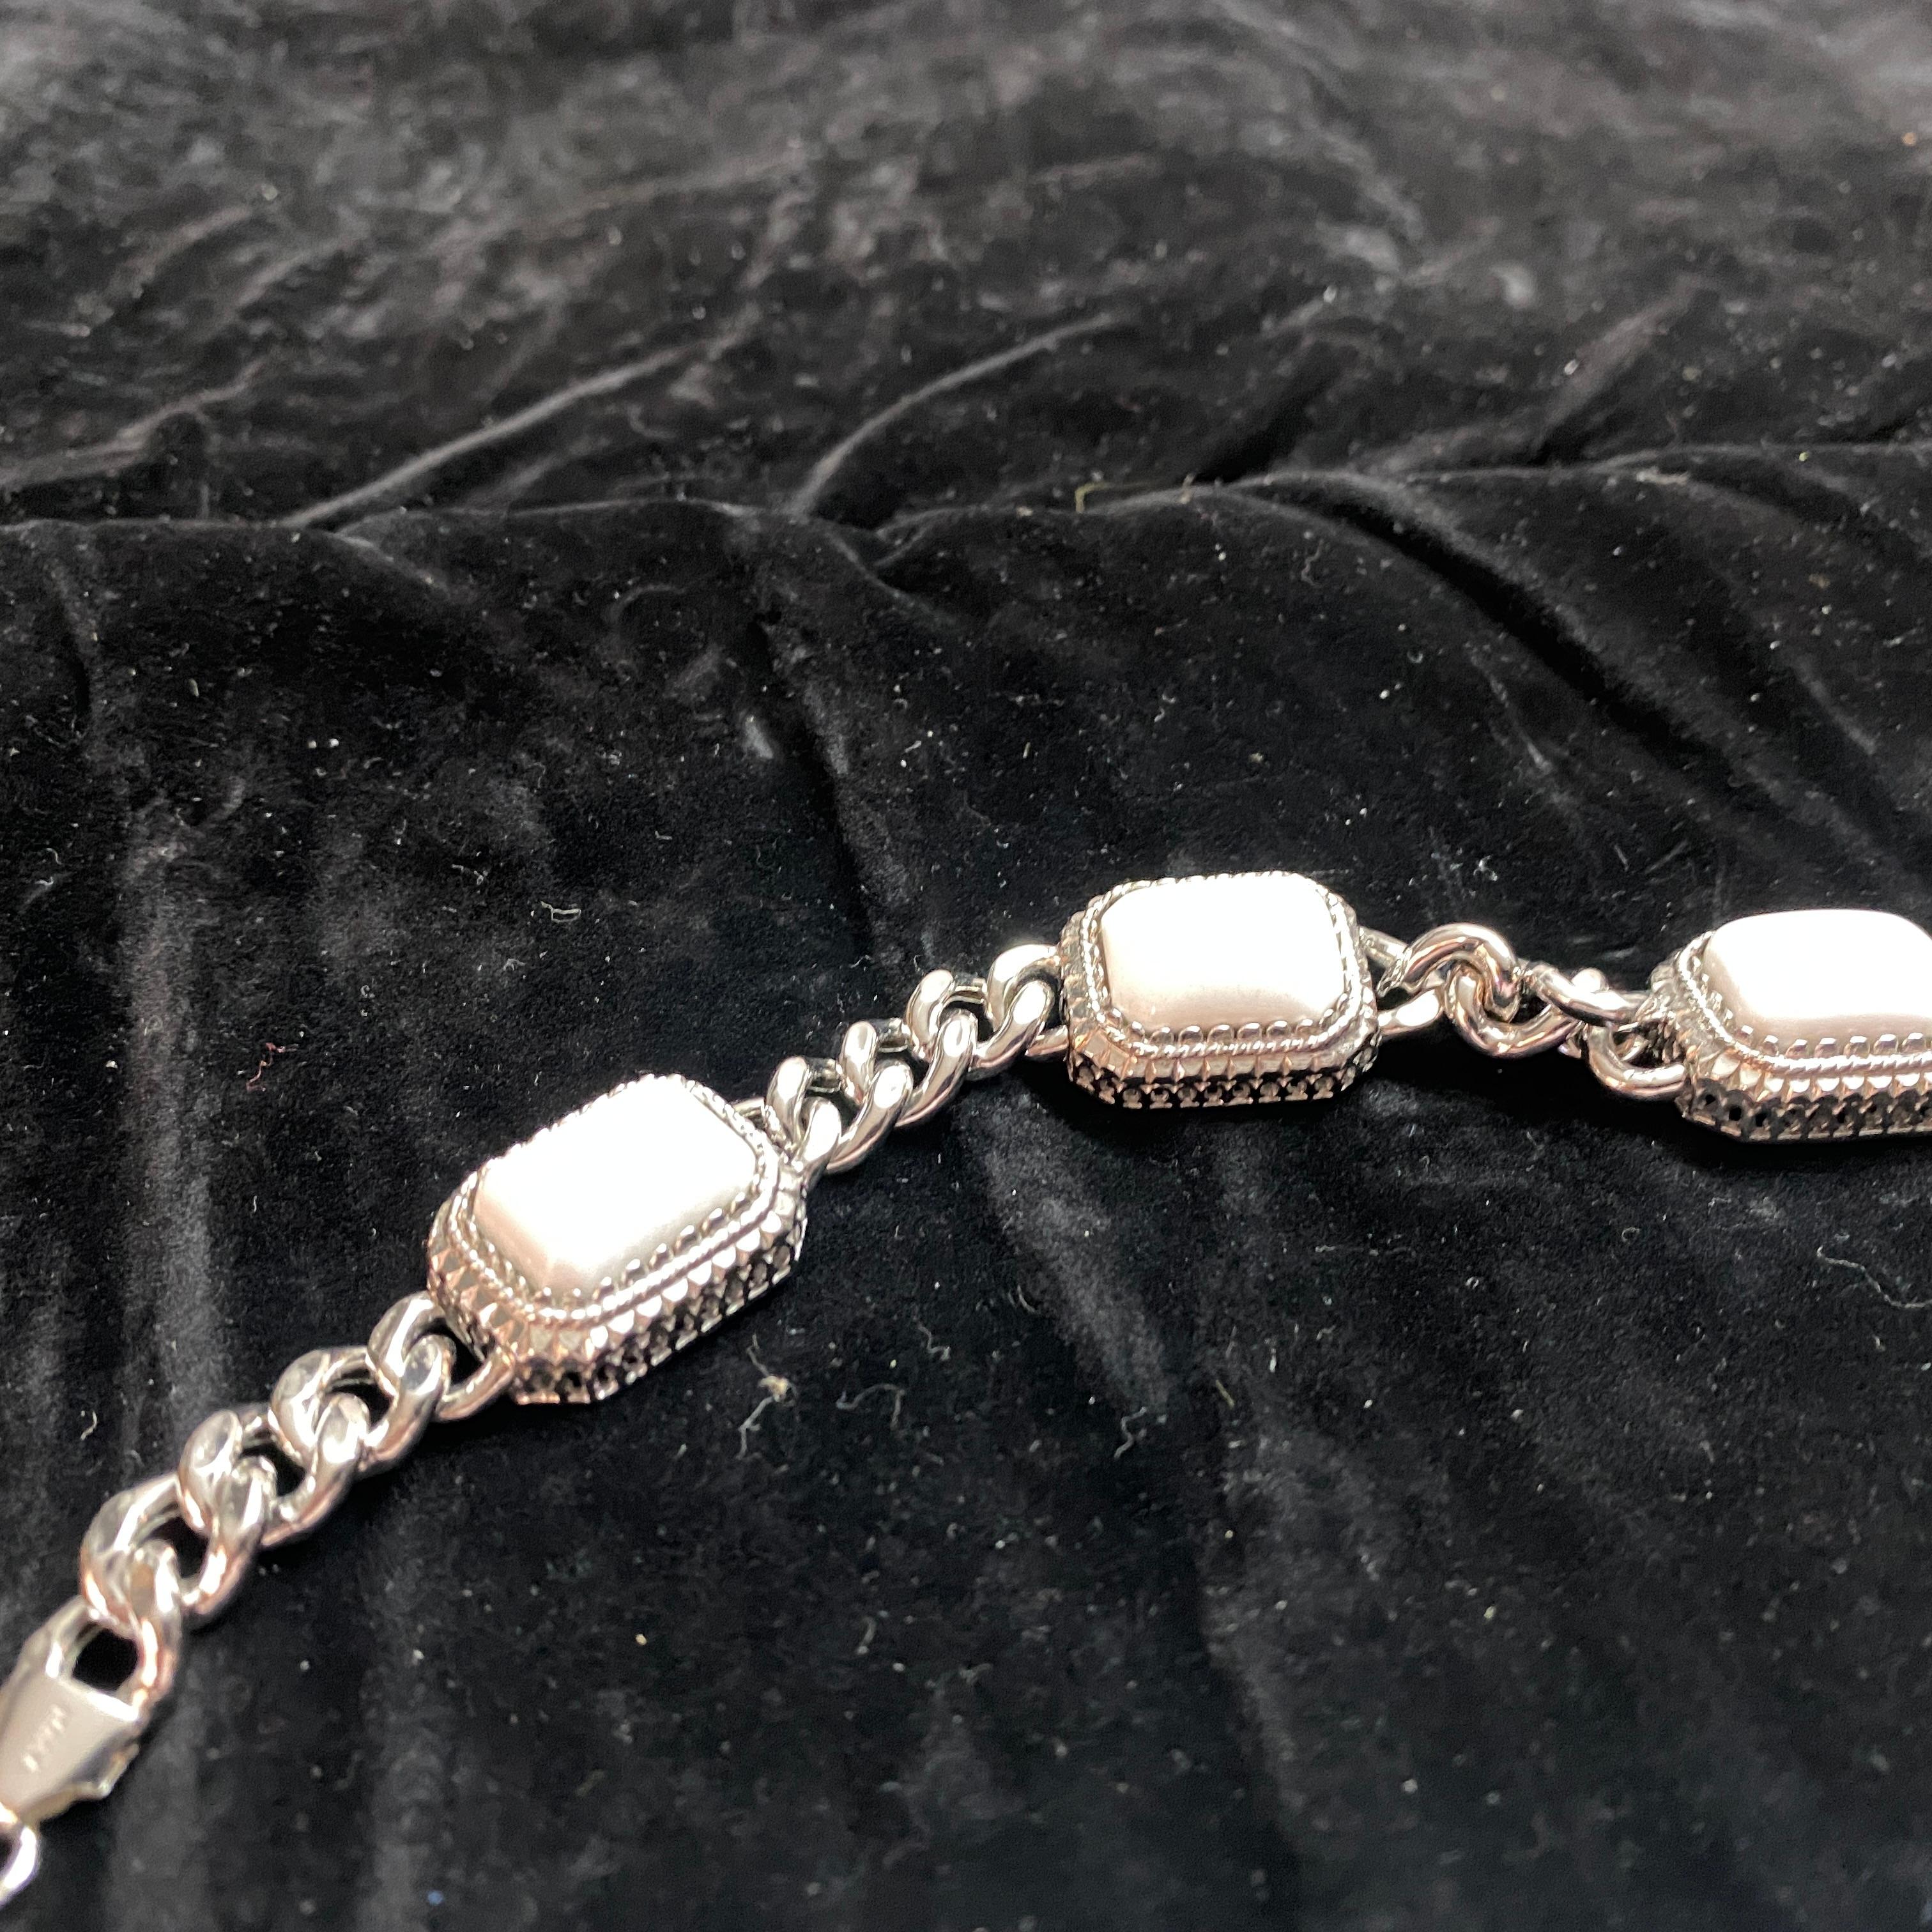 1990s Sterling Silver and White Agate Retro Chain Bracelet by Anomis 2